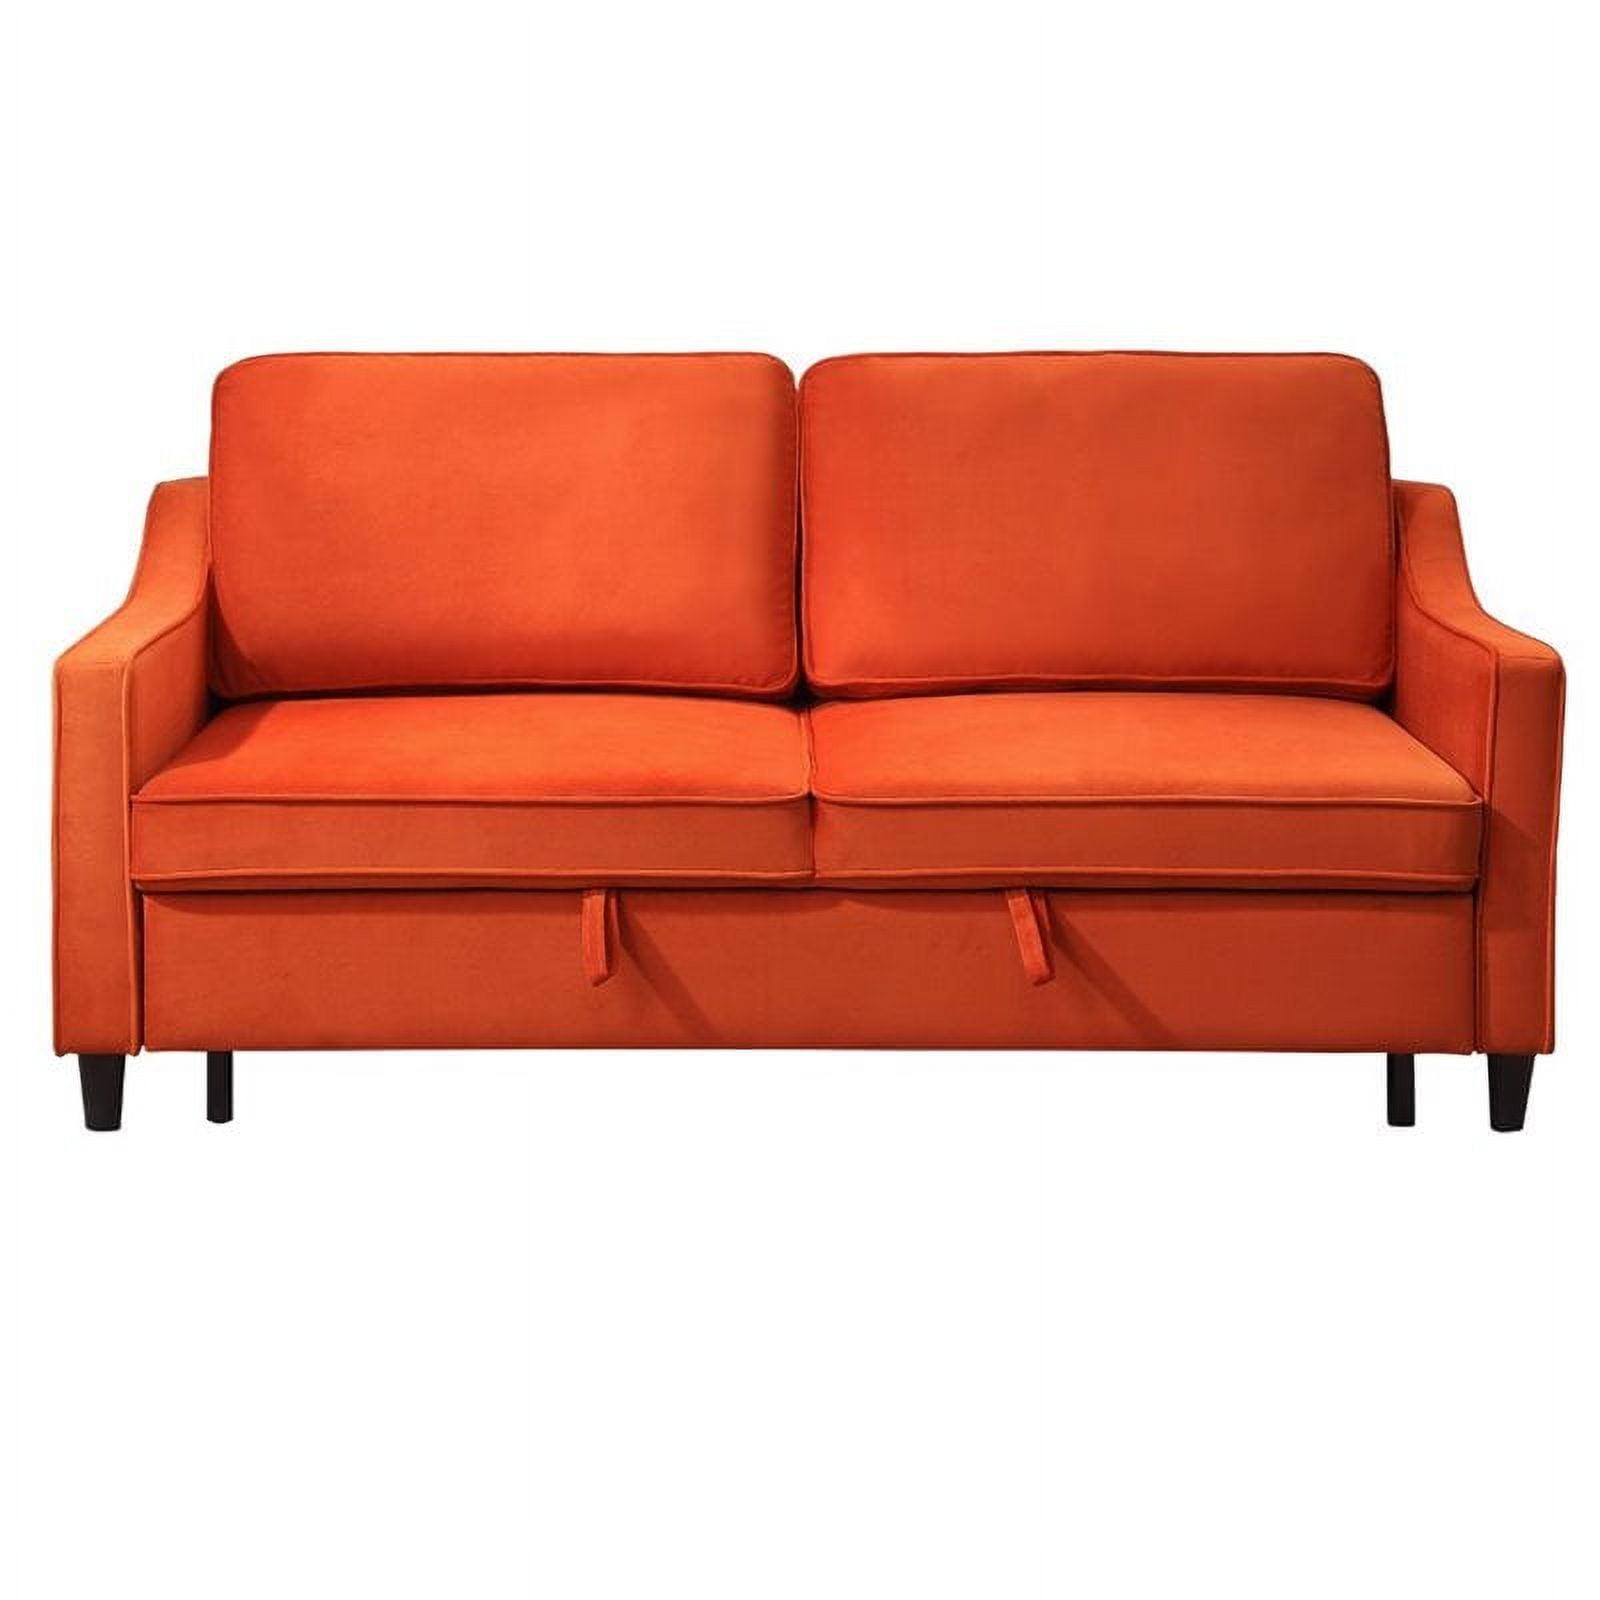 Pumpkin Velvet 71.5" Contemporary Sleeper Sofa with Removable Cushions